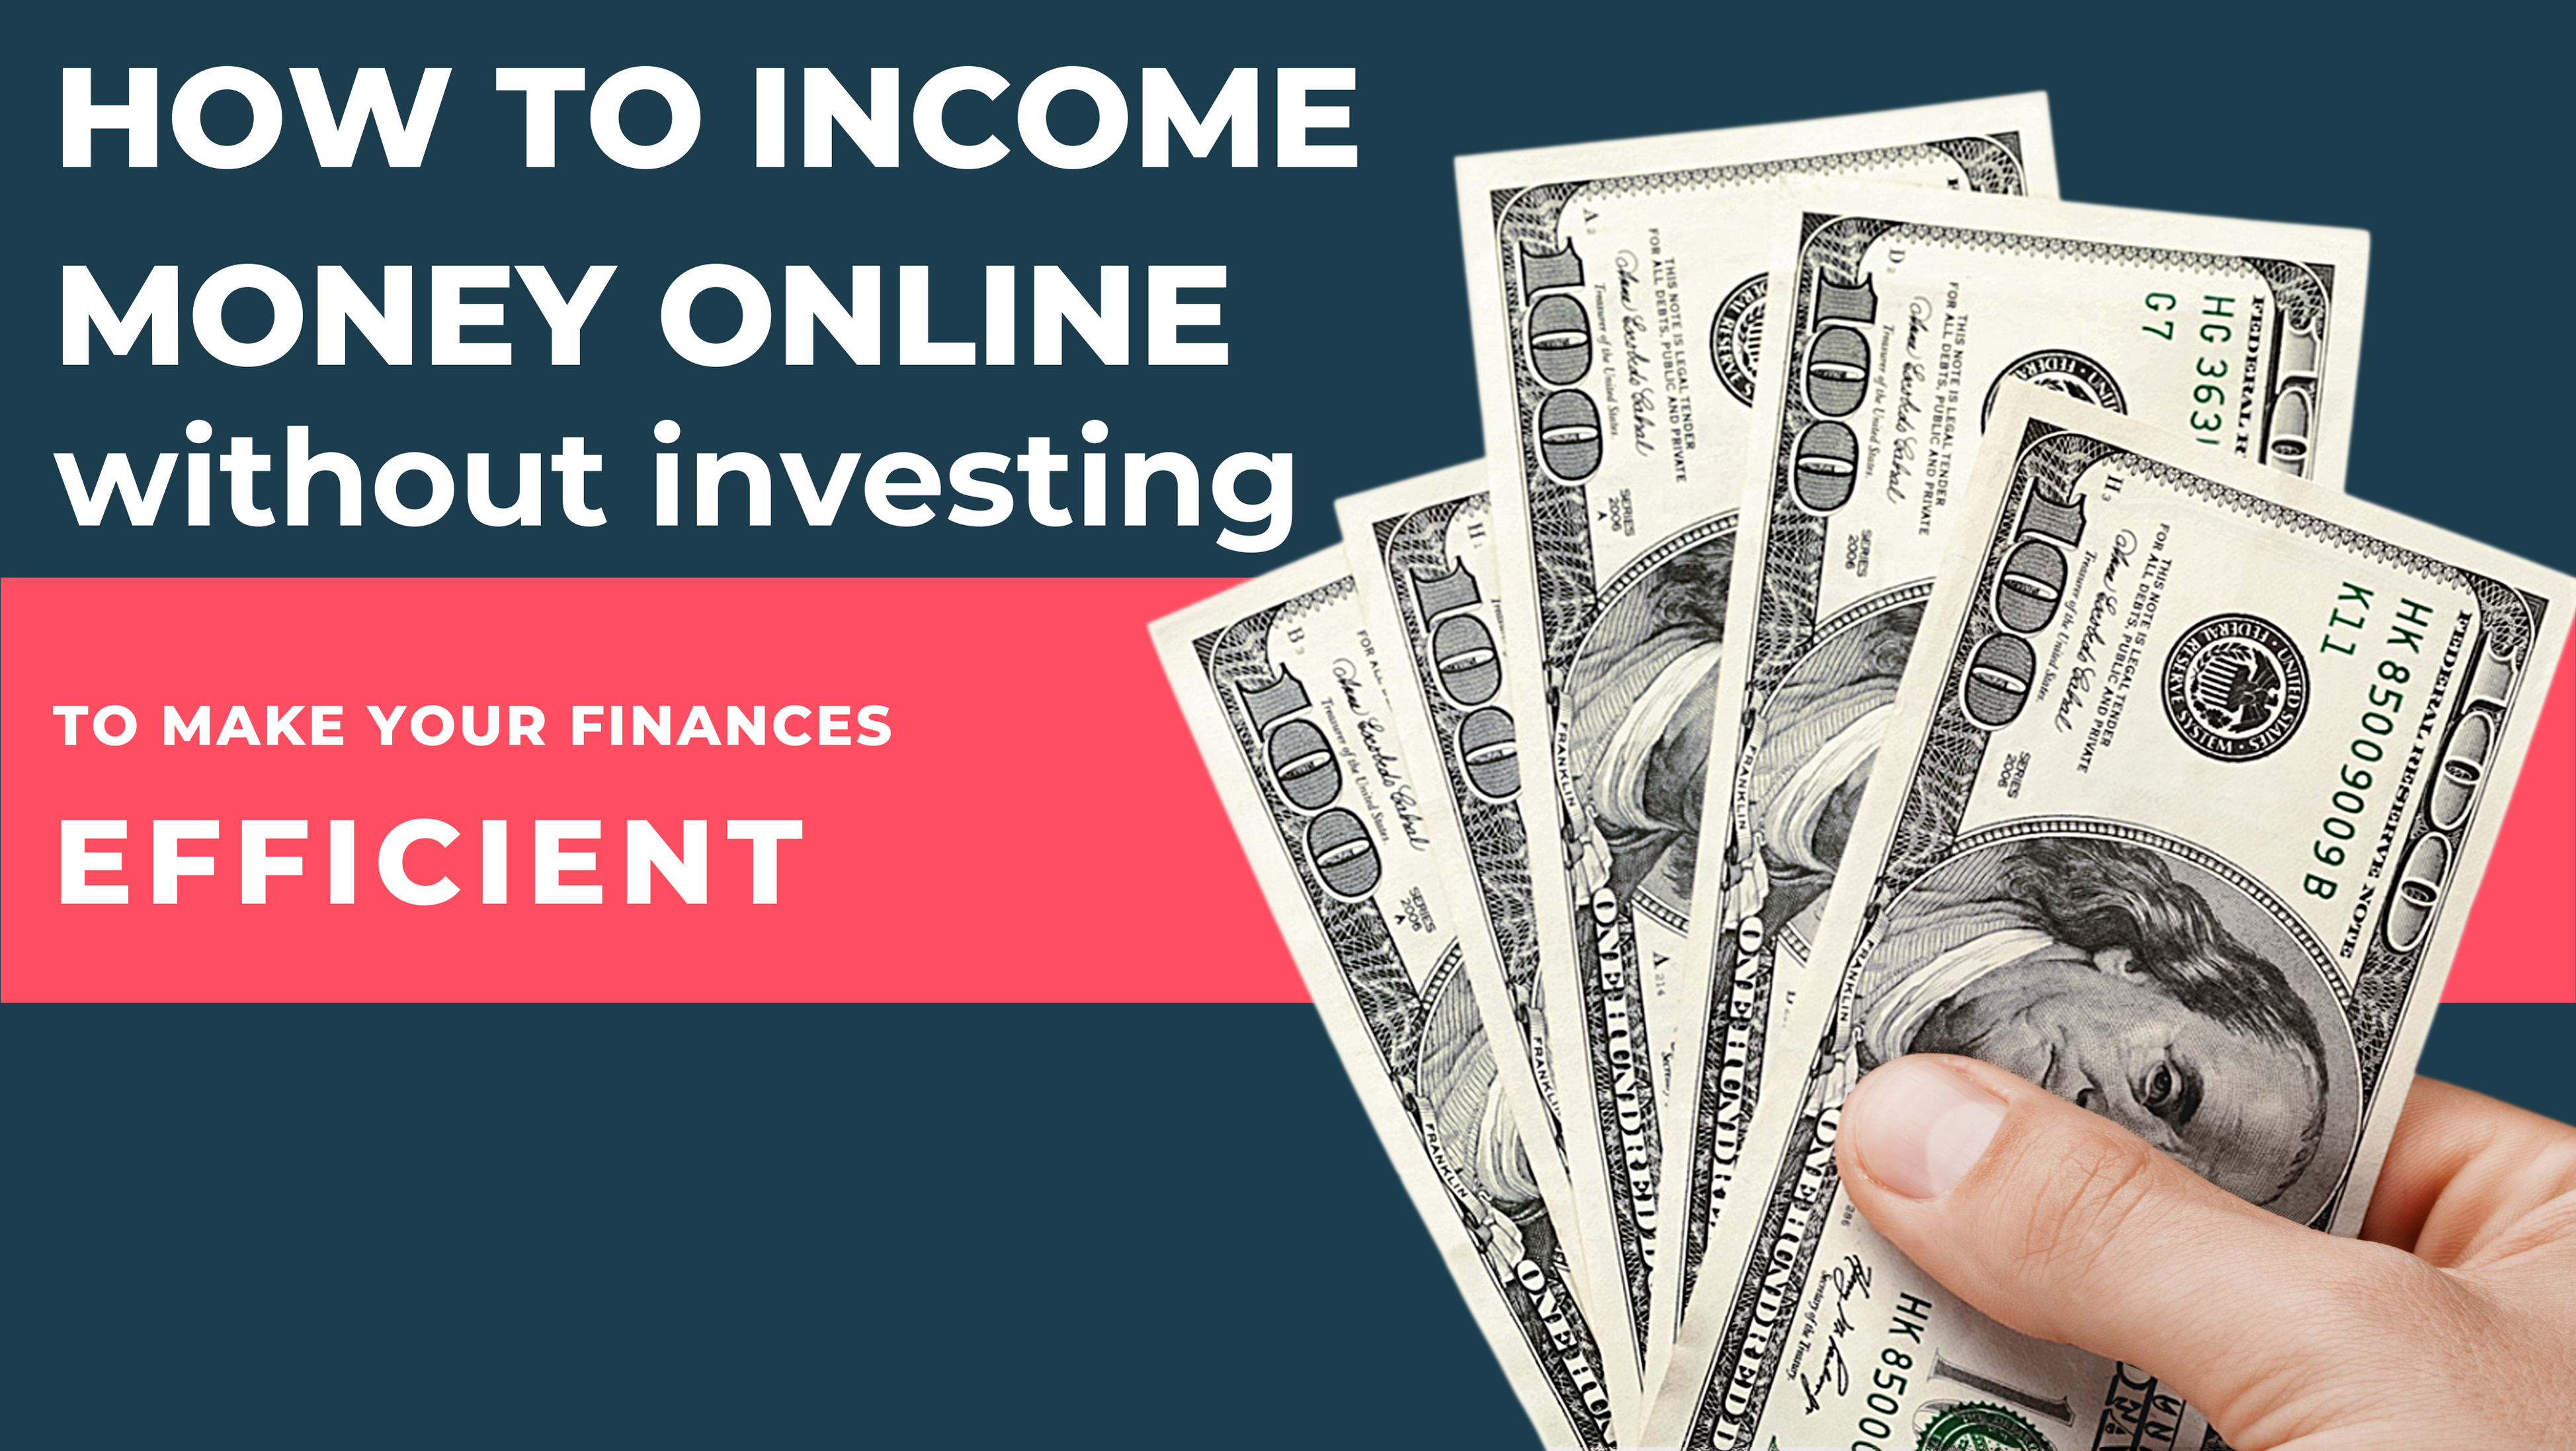 How to income money online